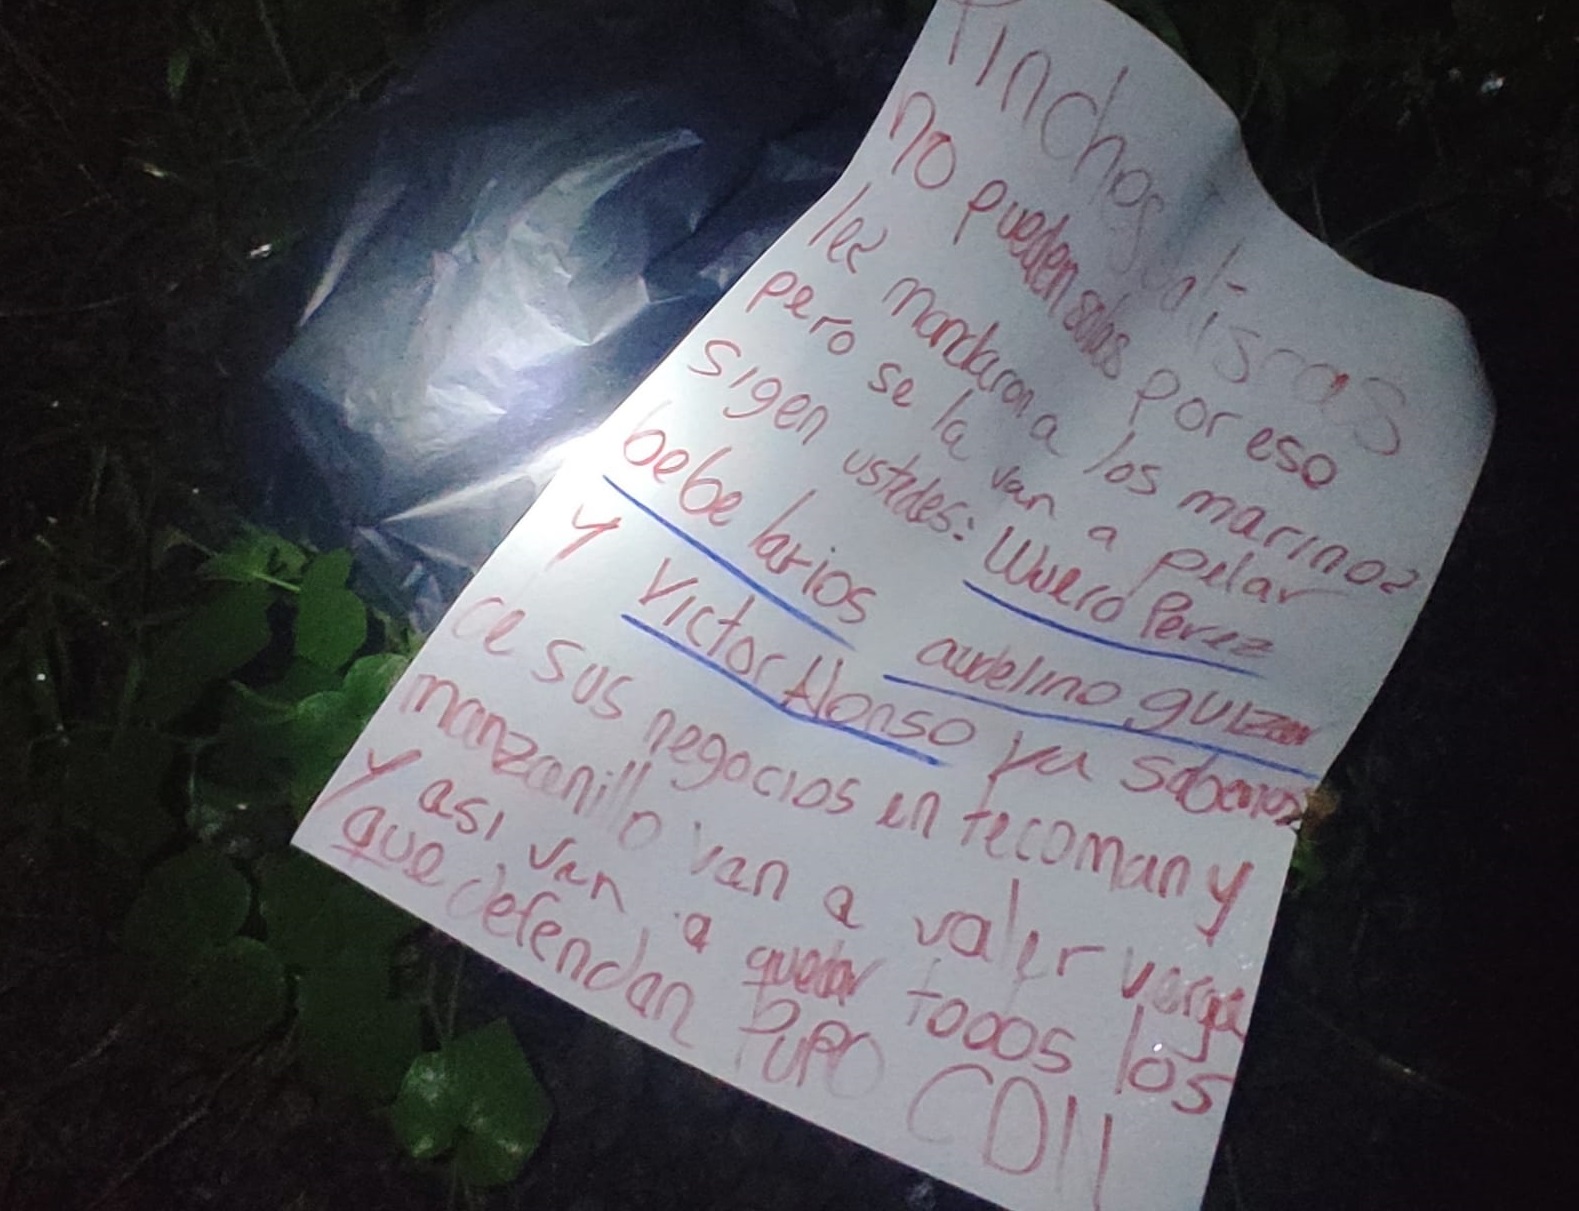 A drug message appeared apparently signed by the Northeast Cartel in which they make threats to the Jalisco New Generation Cartel (Photo: Twitter/@Doujinshi15)